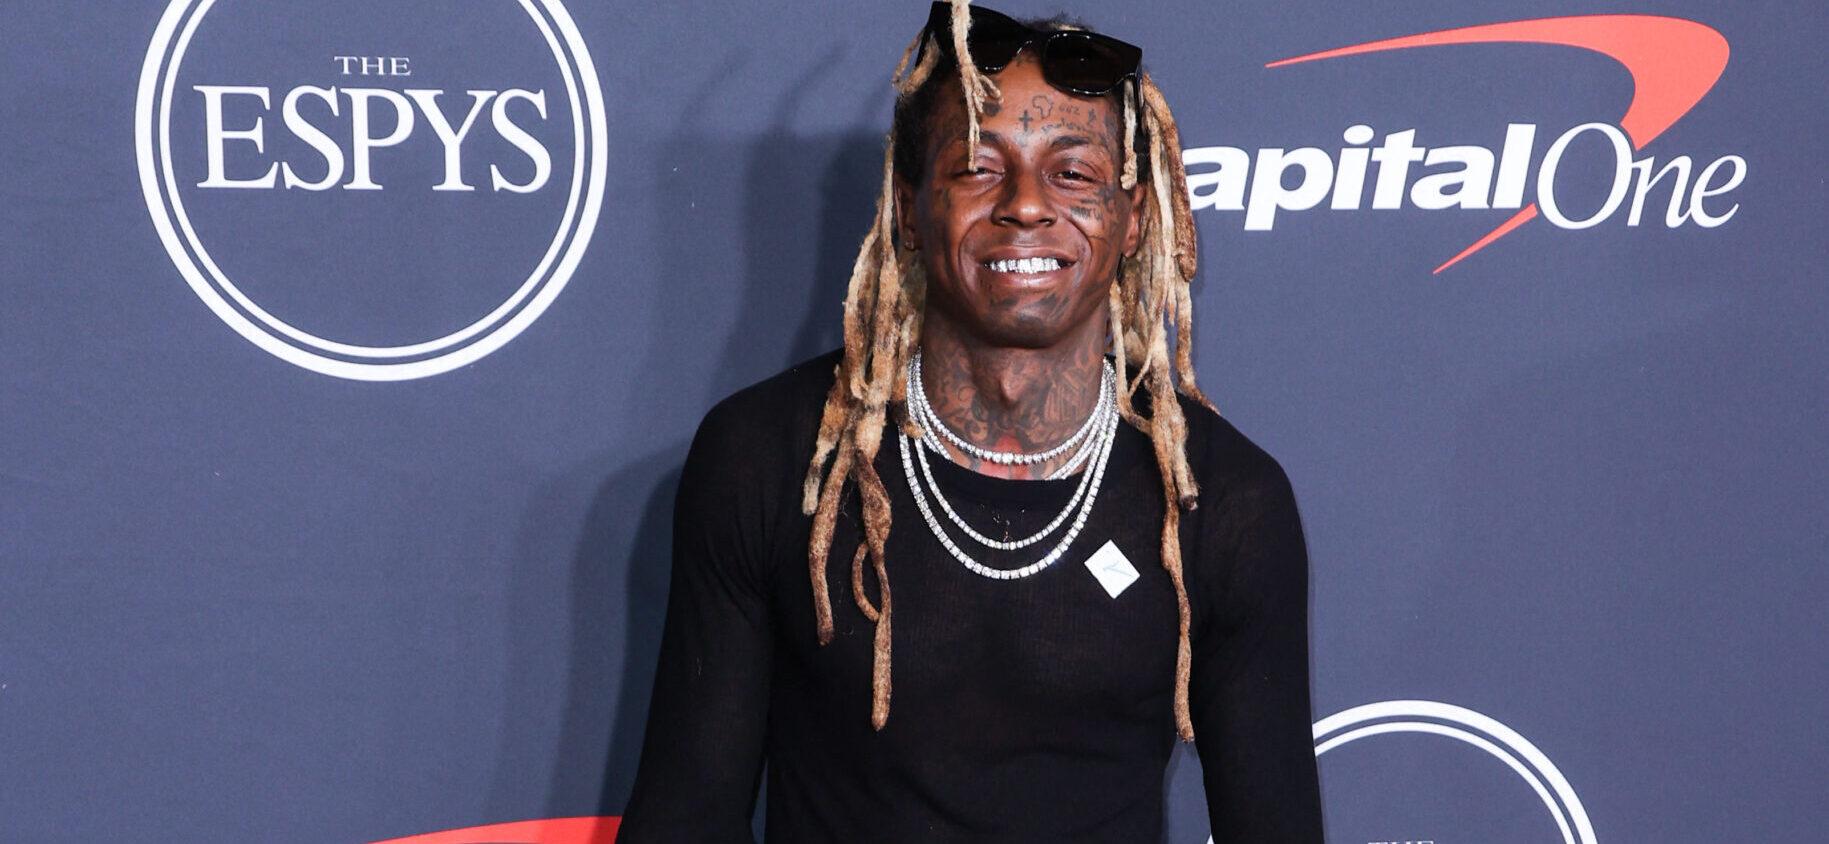 New Lawsuit: Lil Wayne Sued For Assault And Battery Over Alleged Gun Threat